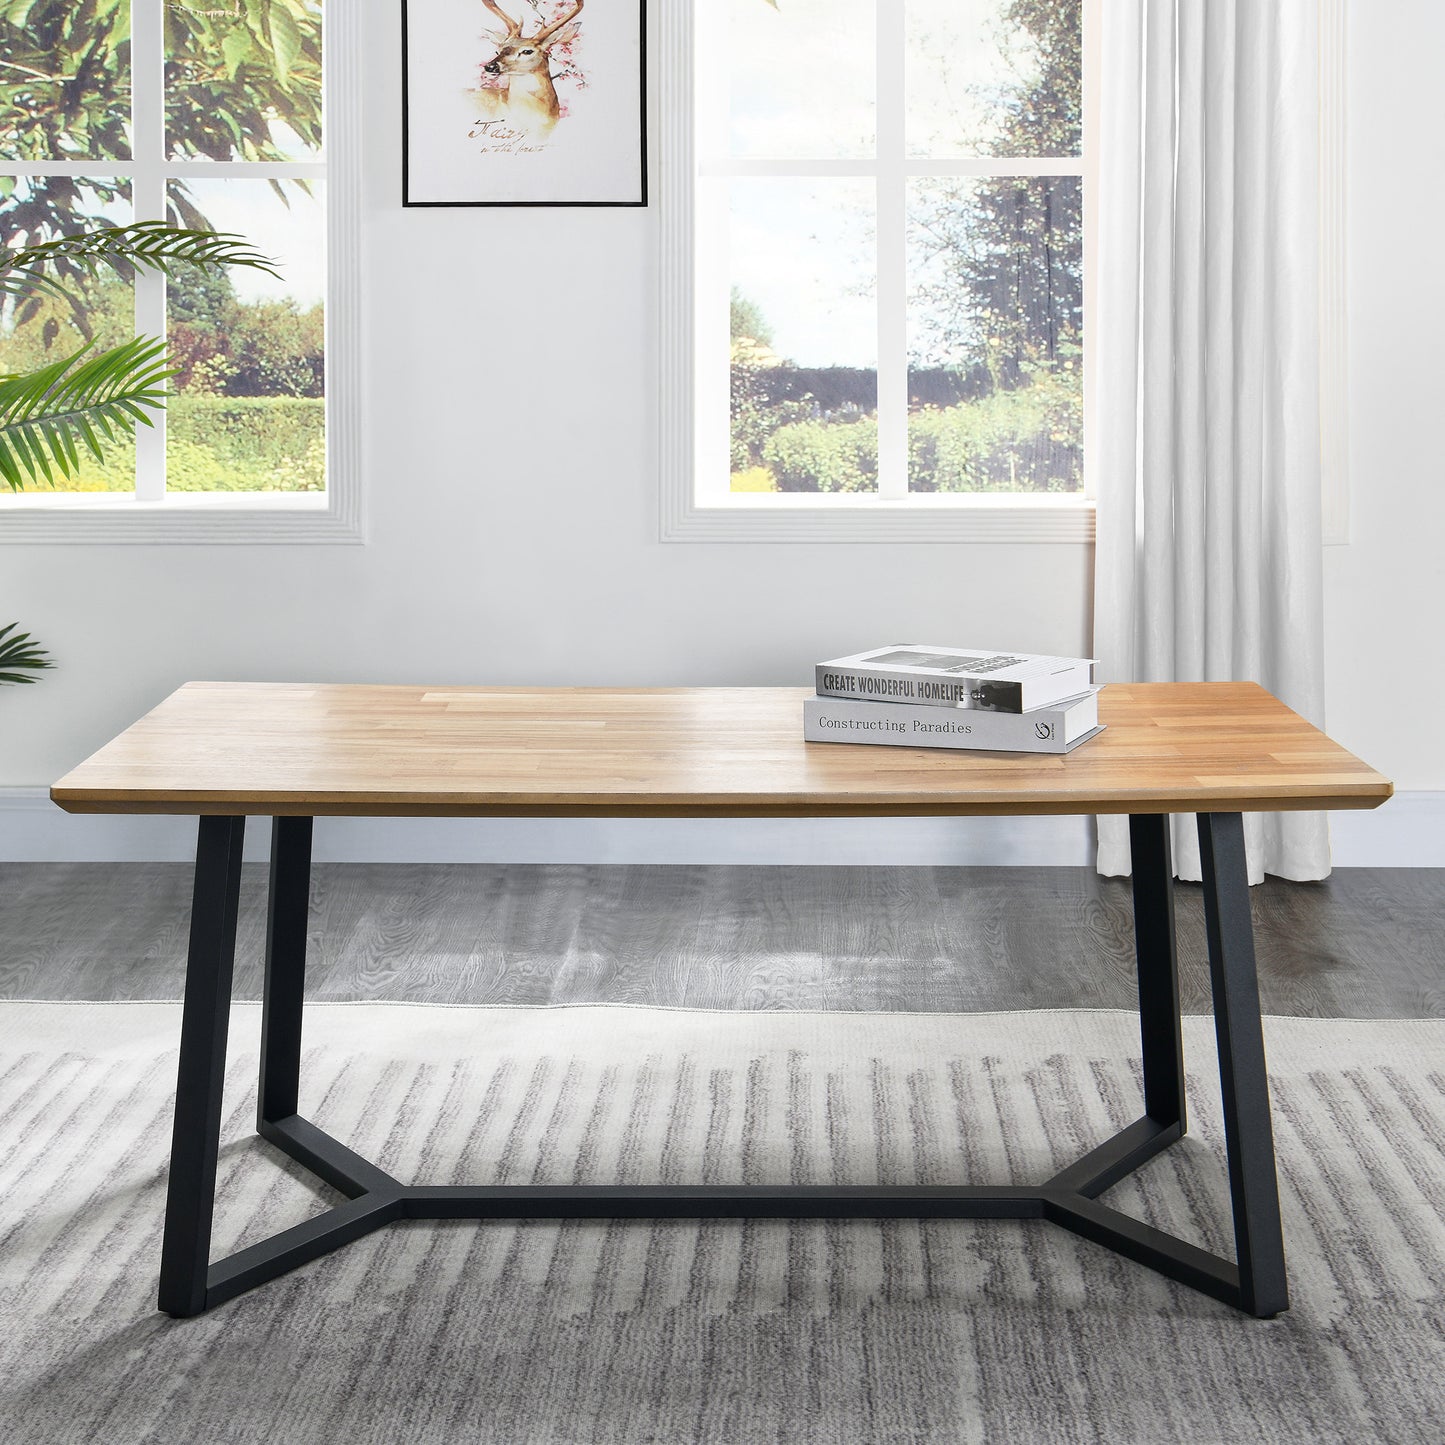 Contemporary Metal and Wood Coffee Table for Living Space